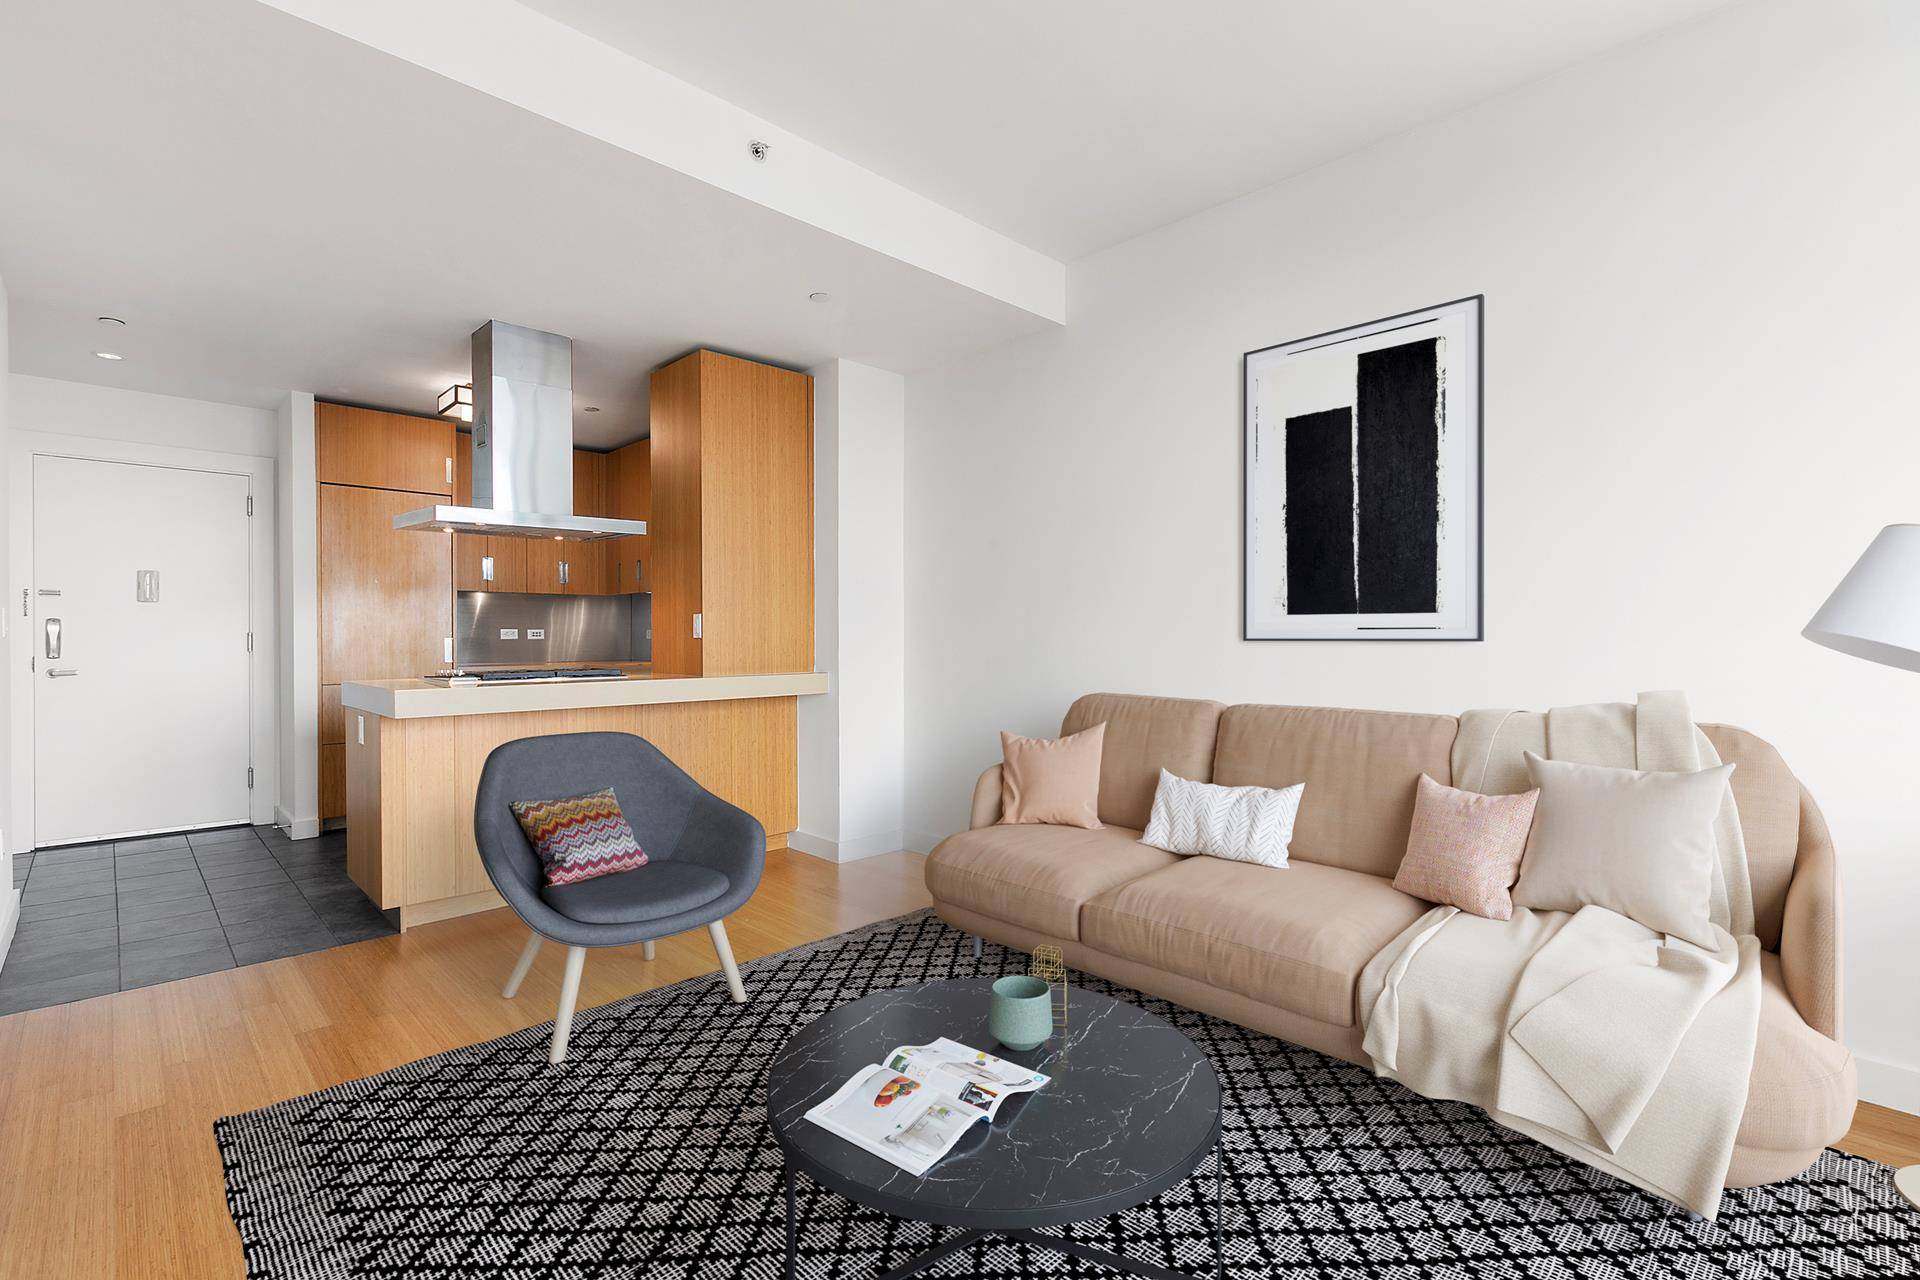 This stunning Clodagh designed condo is currently configured as a 2 Bedroom, 2 bathroom home and features a 36 foot long terrace that stretches the entirety of the residence overlooking ...